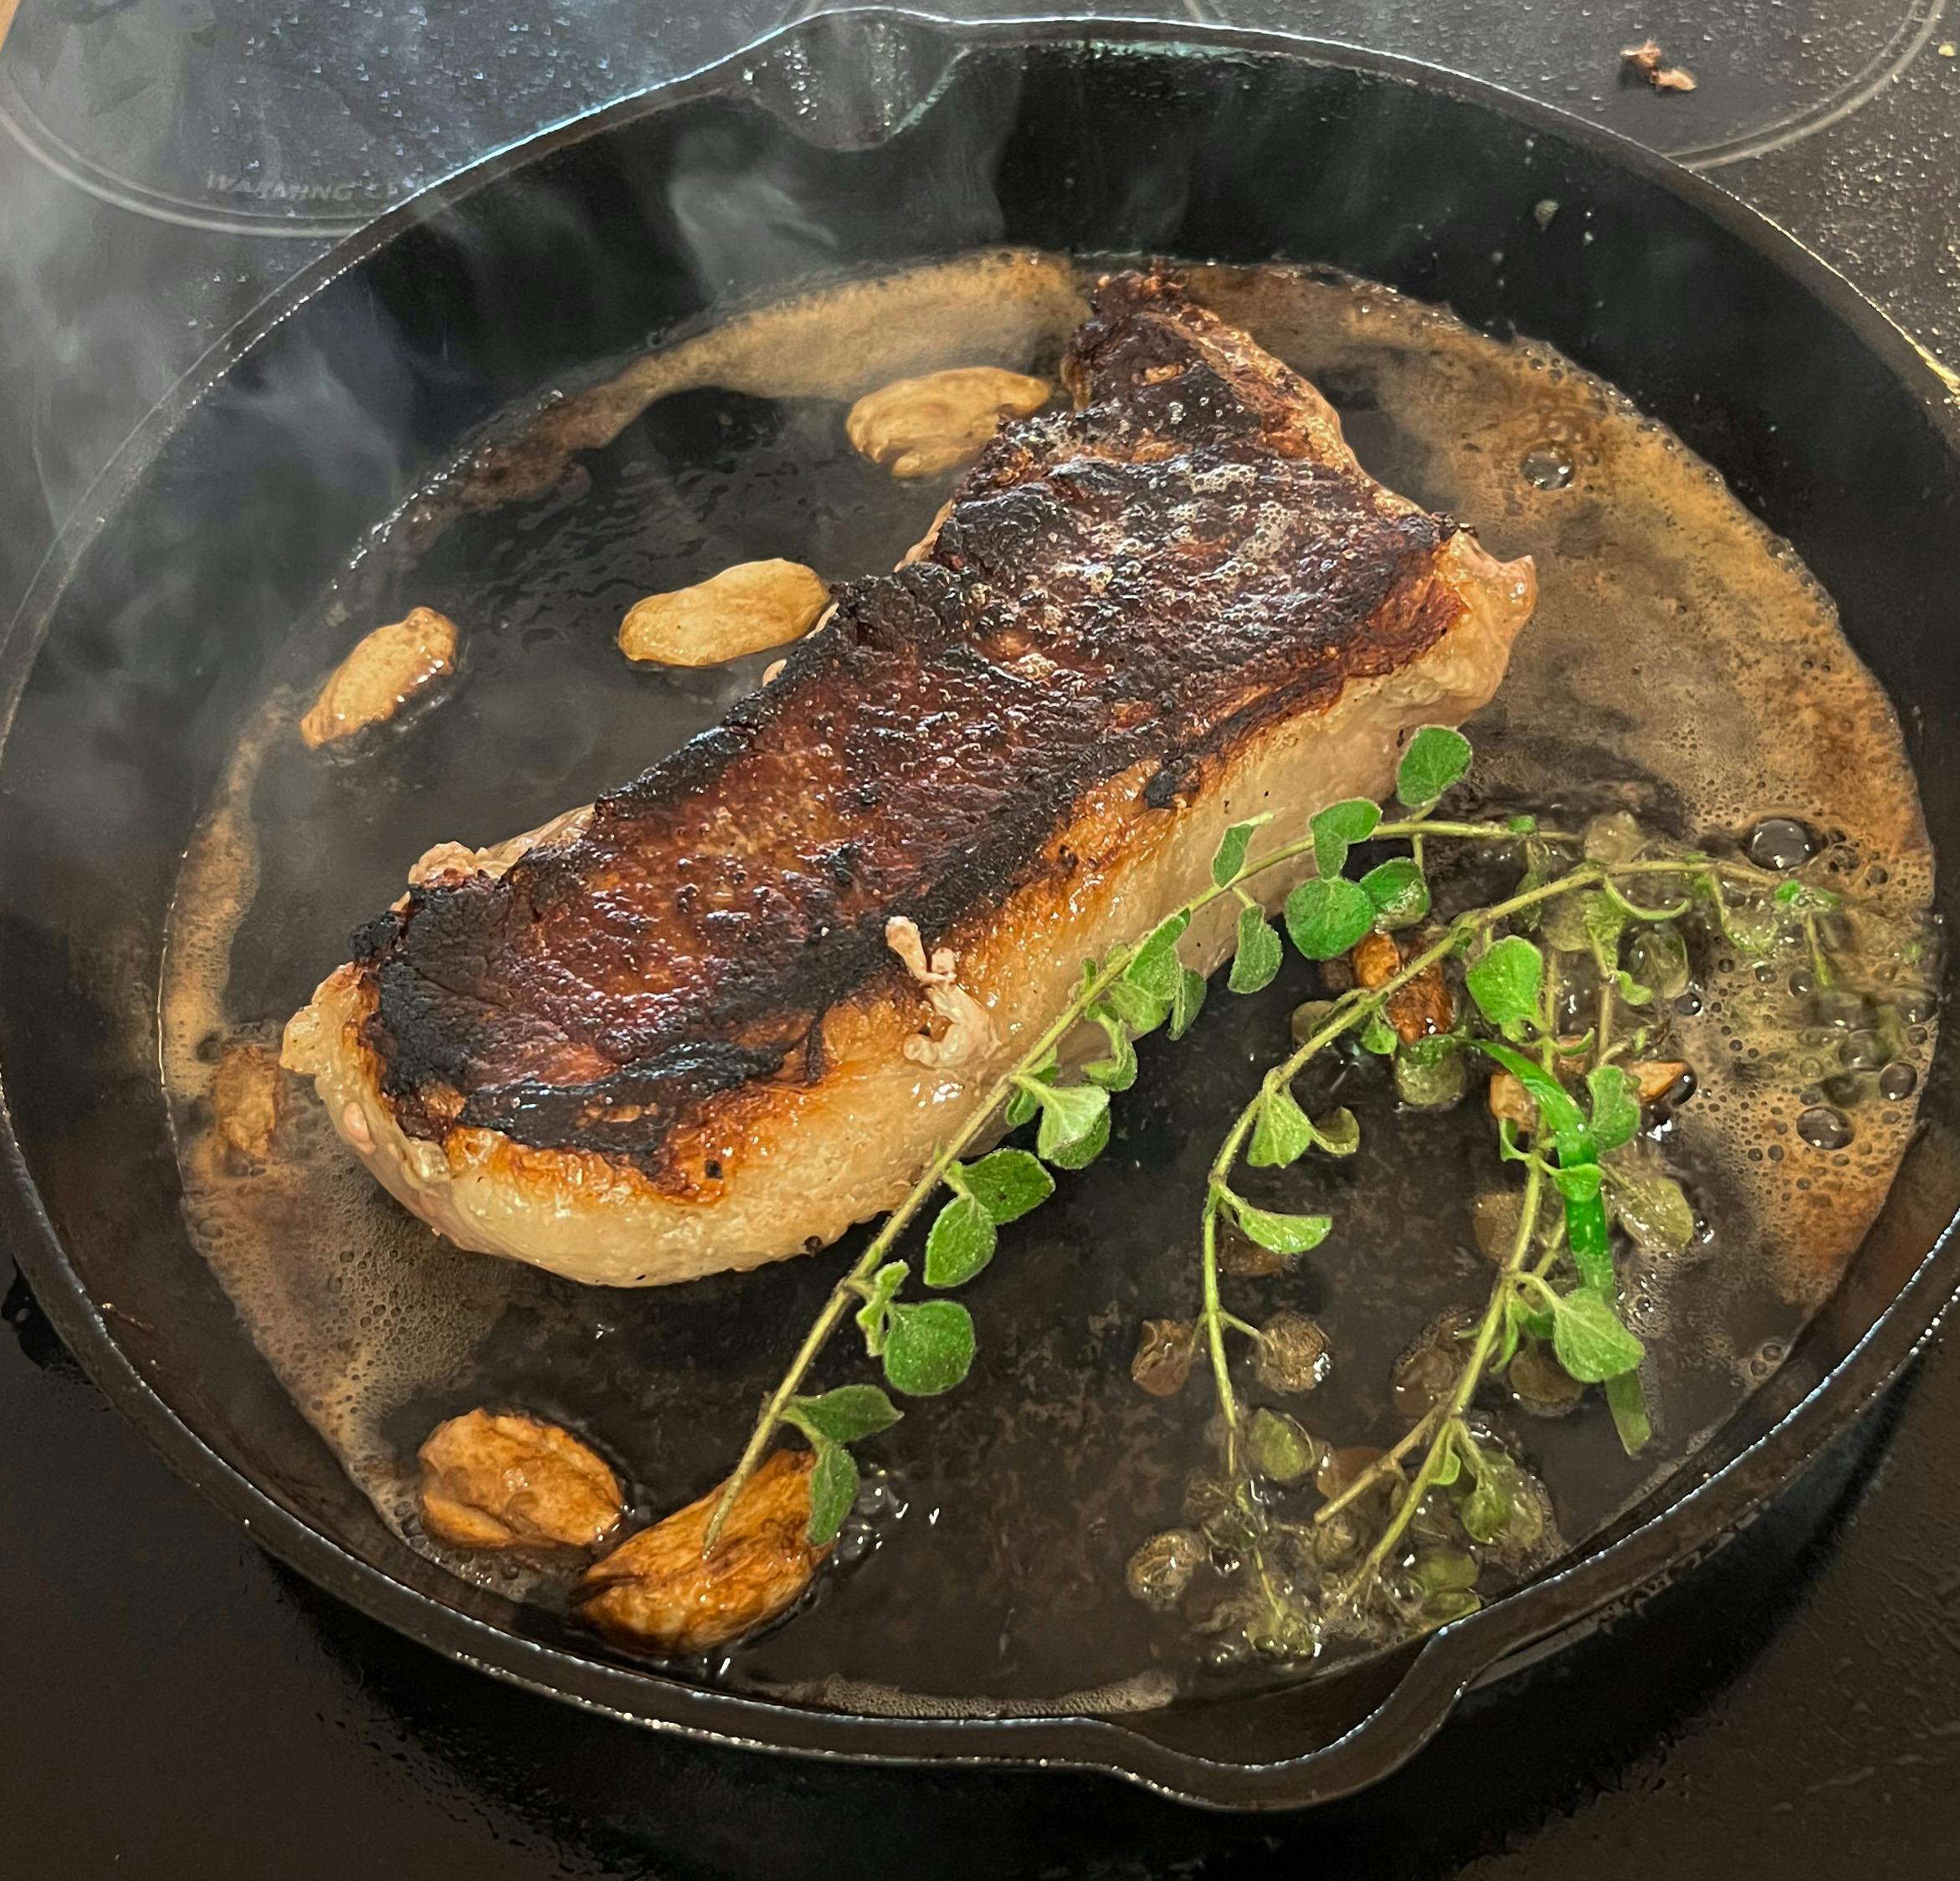 Steak sizzling in the pan